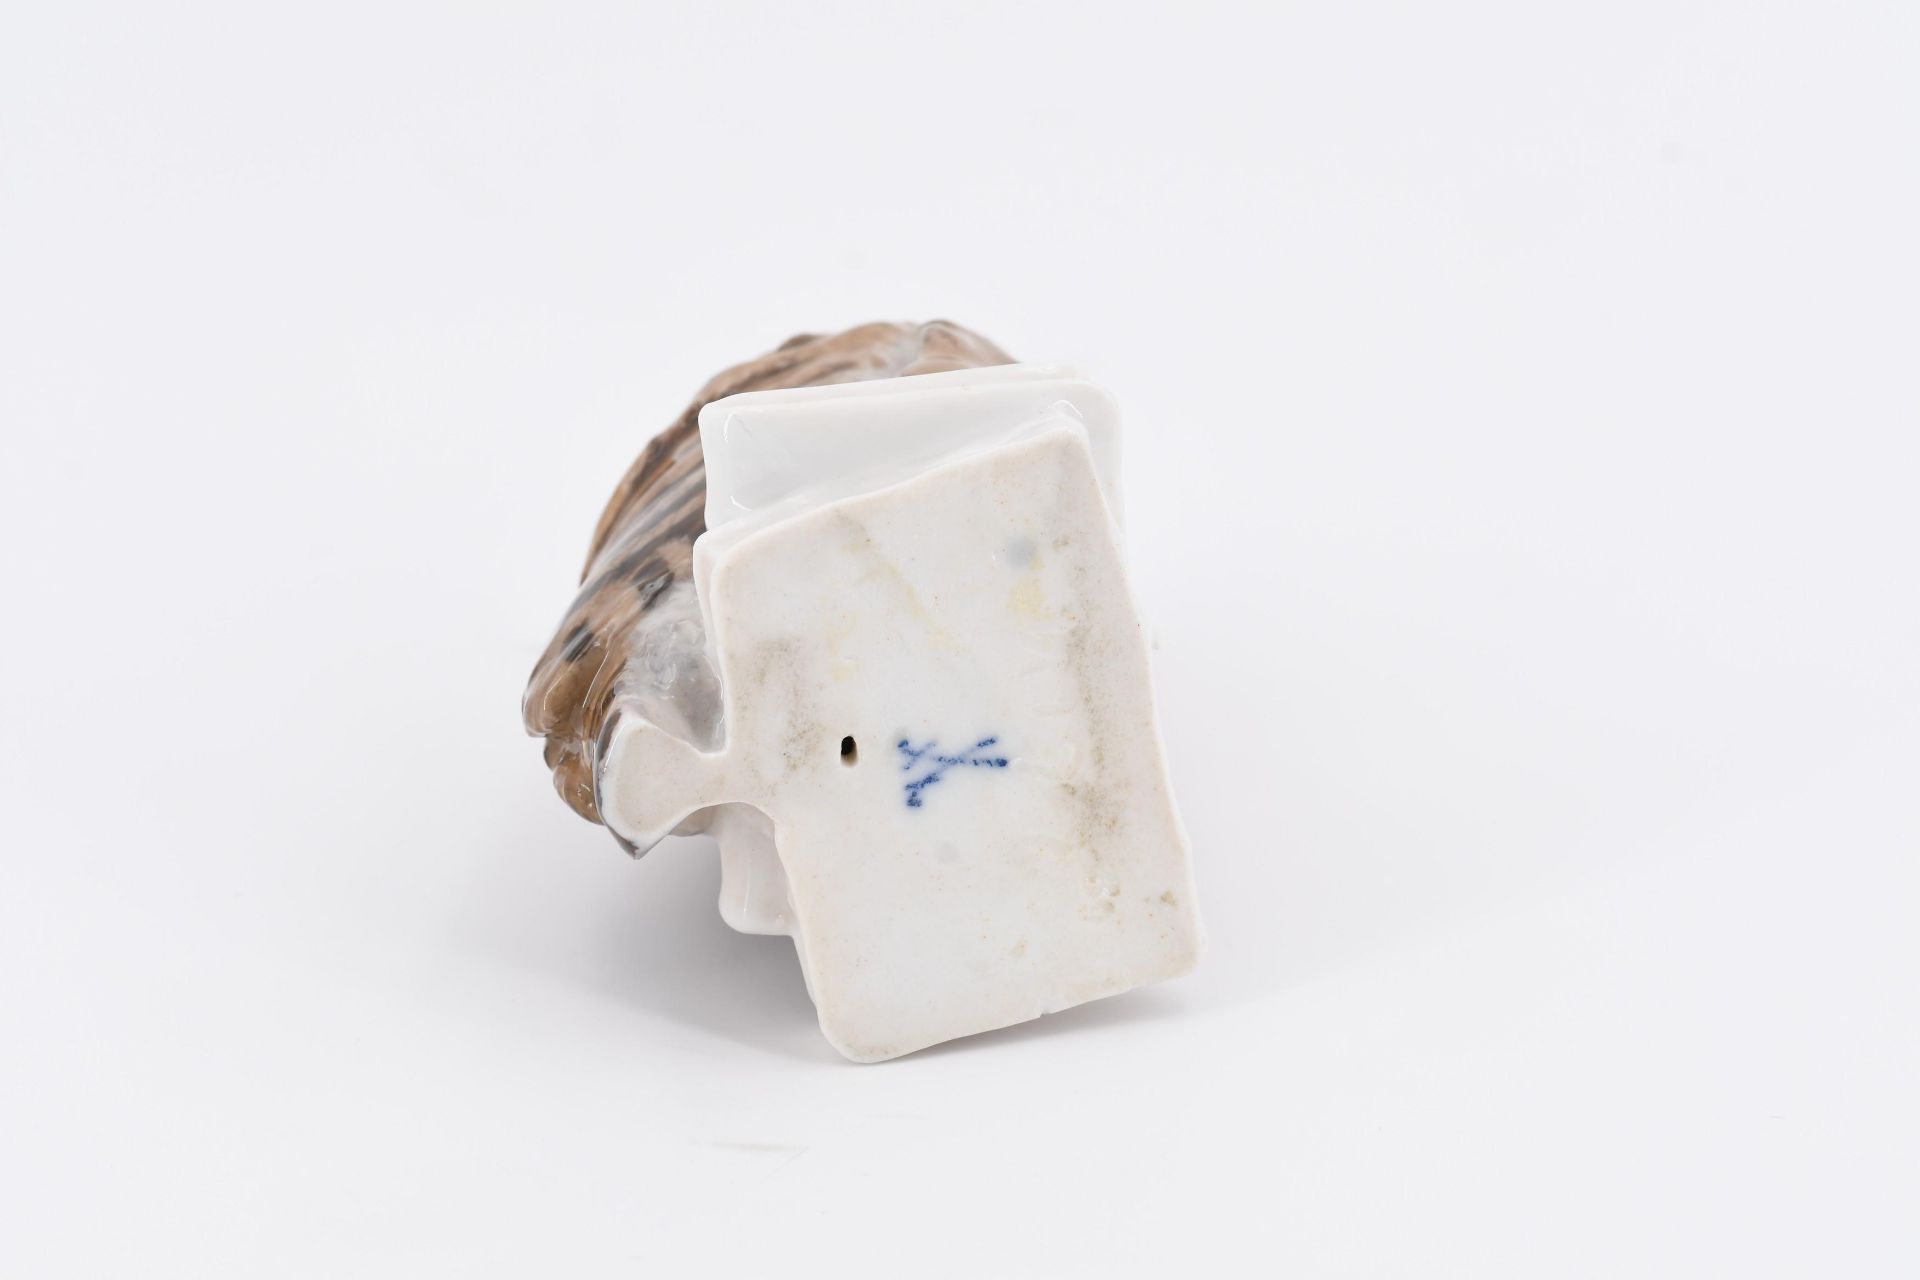 Small porcelain owl on book stack - Image 6 of 6